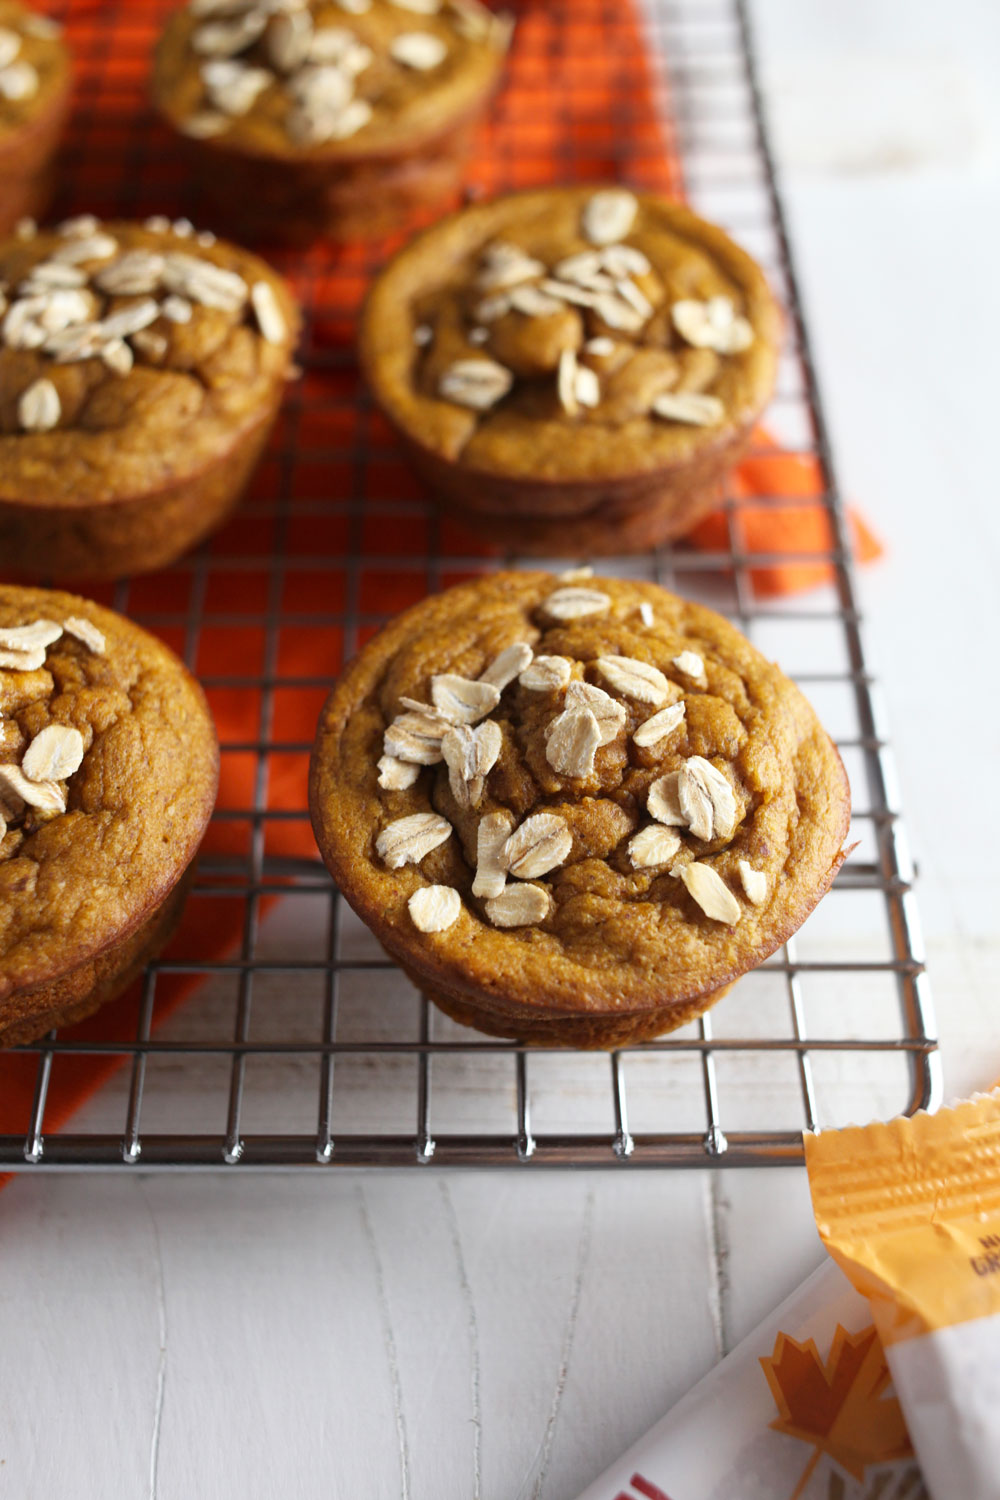 Flourless Maple Almond Sweet Potato Muffins // These flourless and gluten free muffins are made with just a free ingredients that can be whirled up in a blender for a healthy on-the-go breakfast, snack or treat that is healthy and low in sugar. 24 Carrot Life #sponsored #fall #flourless #glutenfree